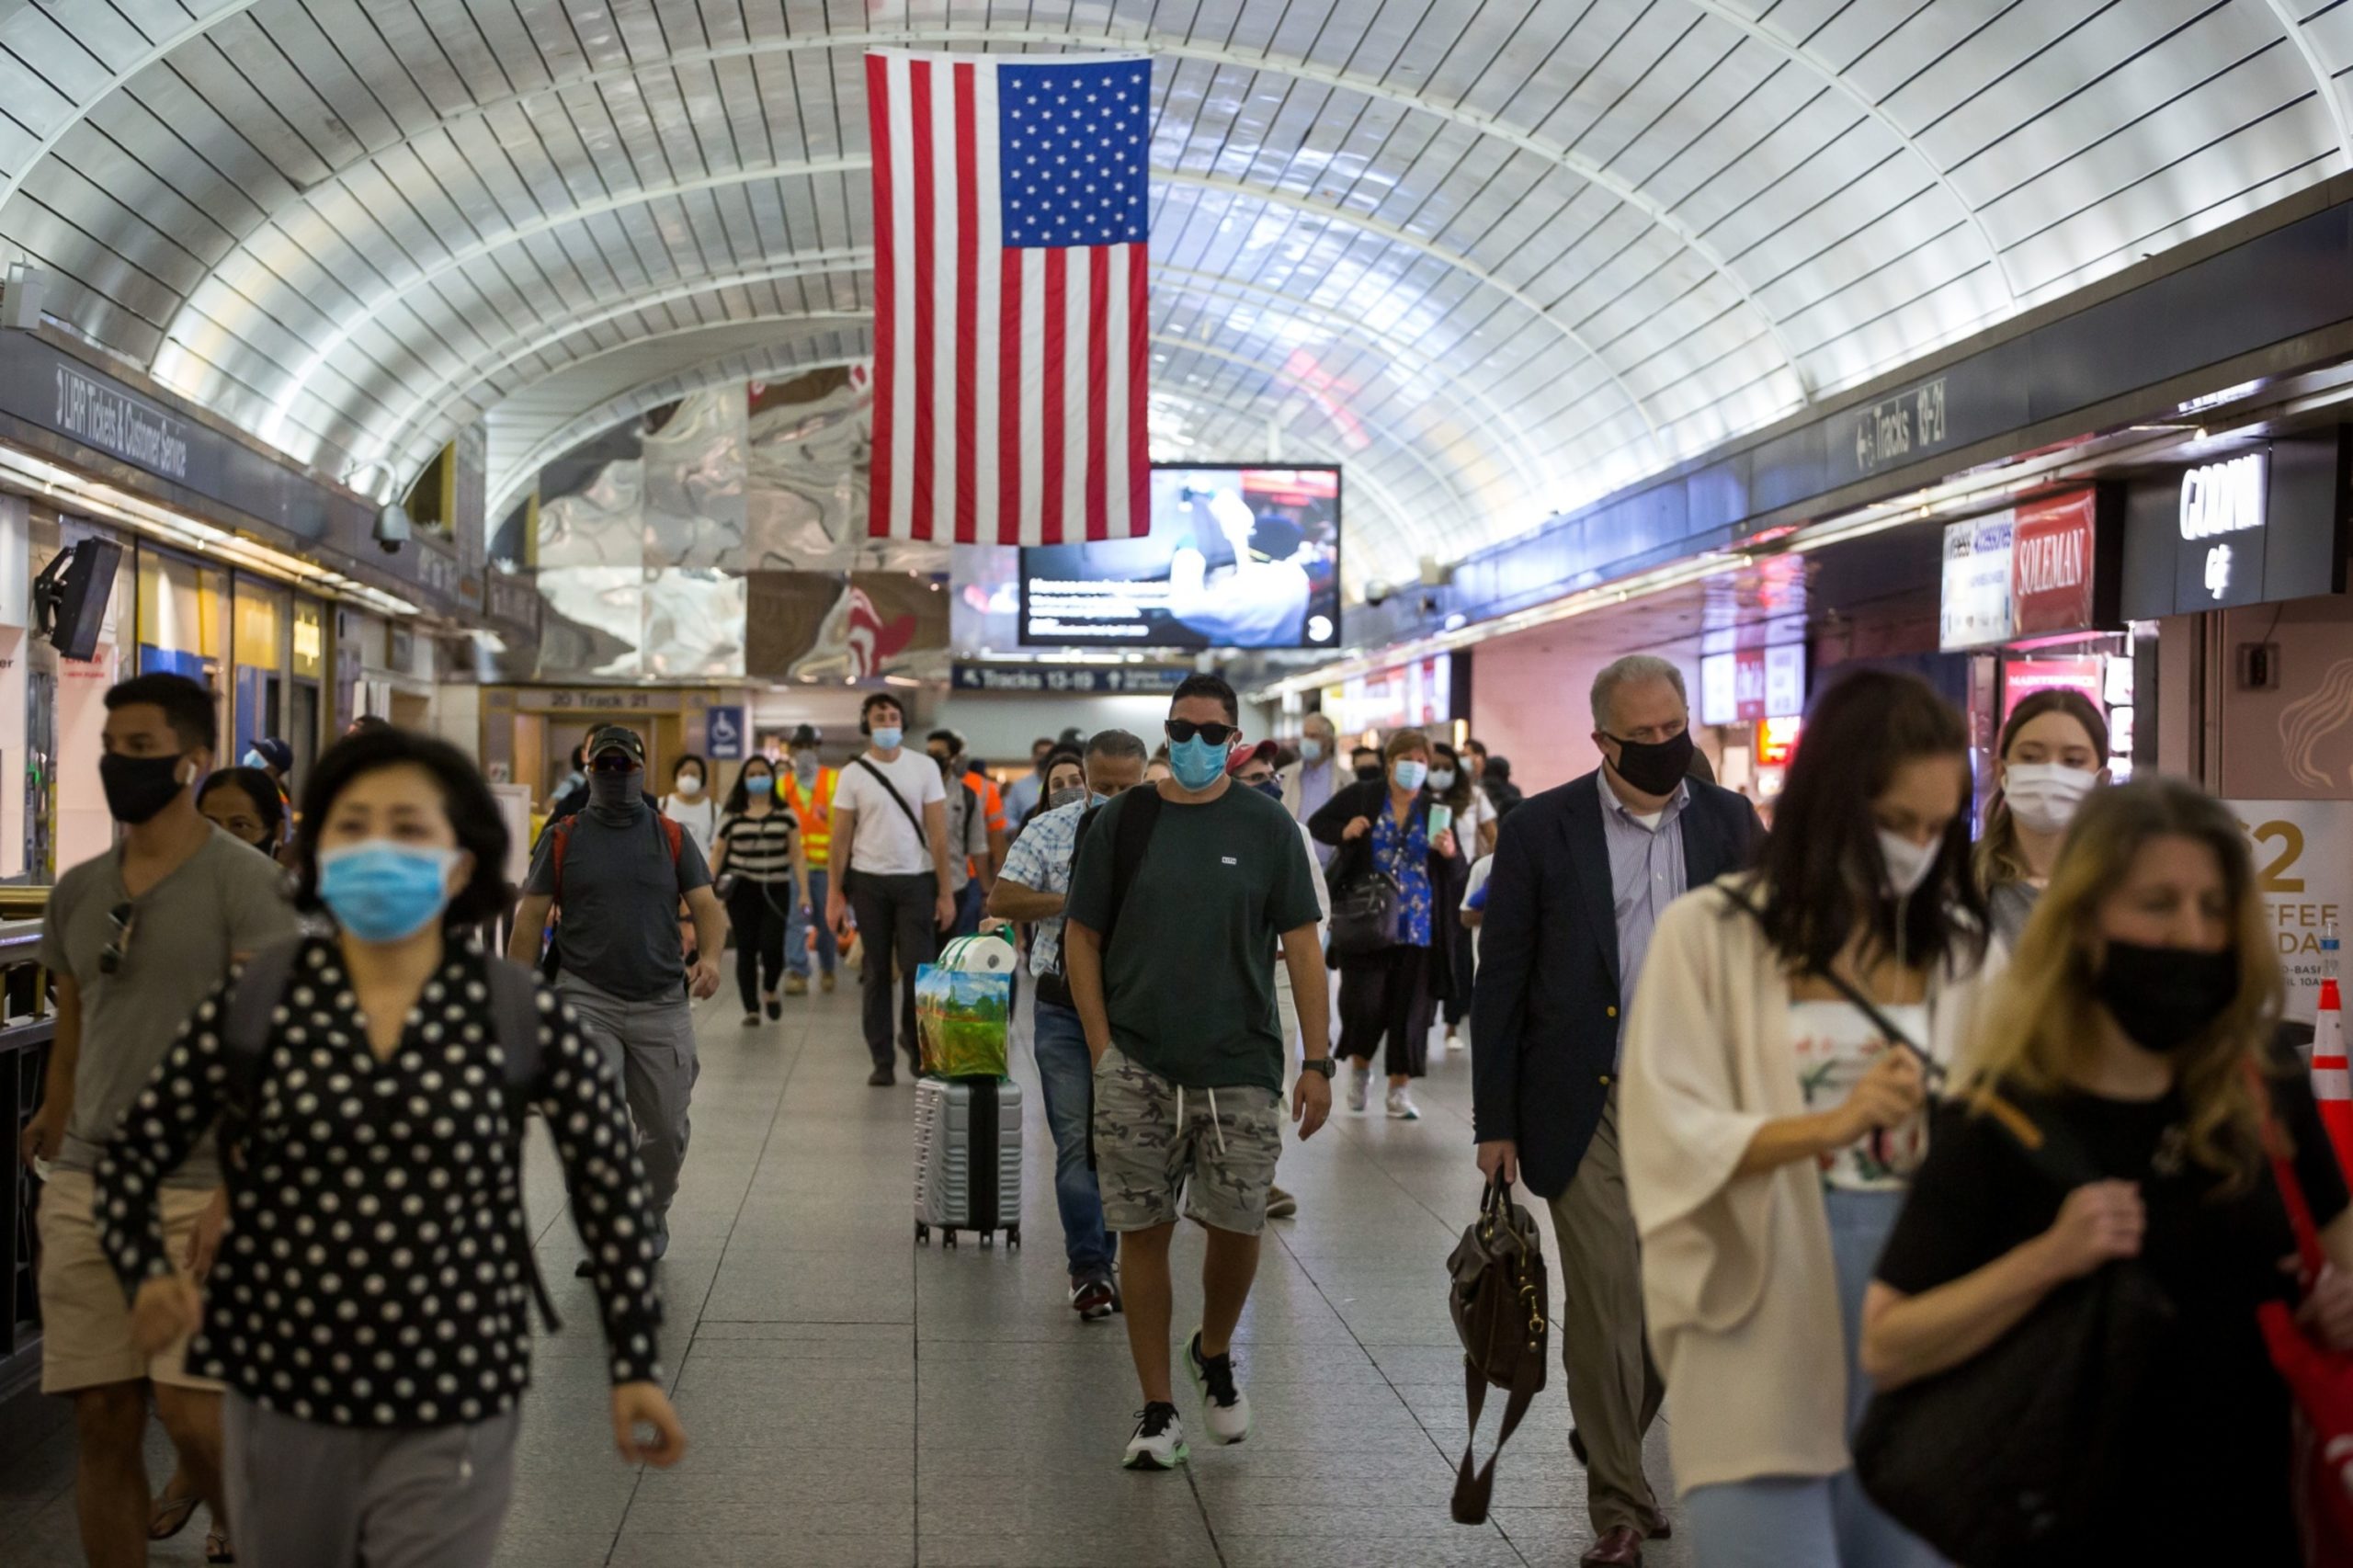 Penn Station: “A Massive Real Estate Play in Search of a Transit Project”